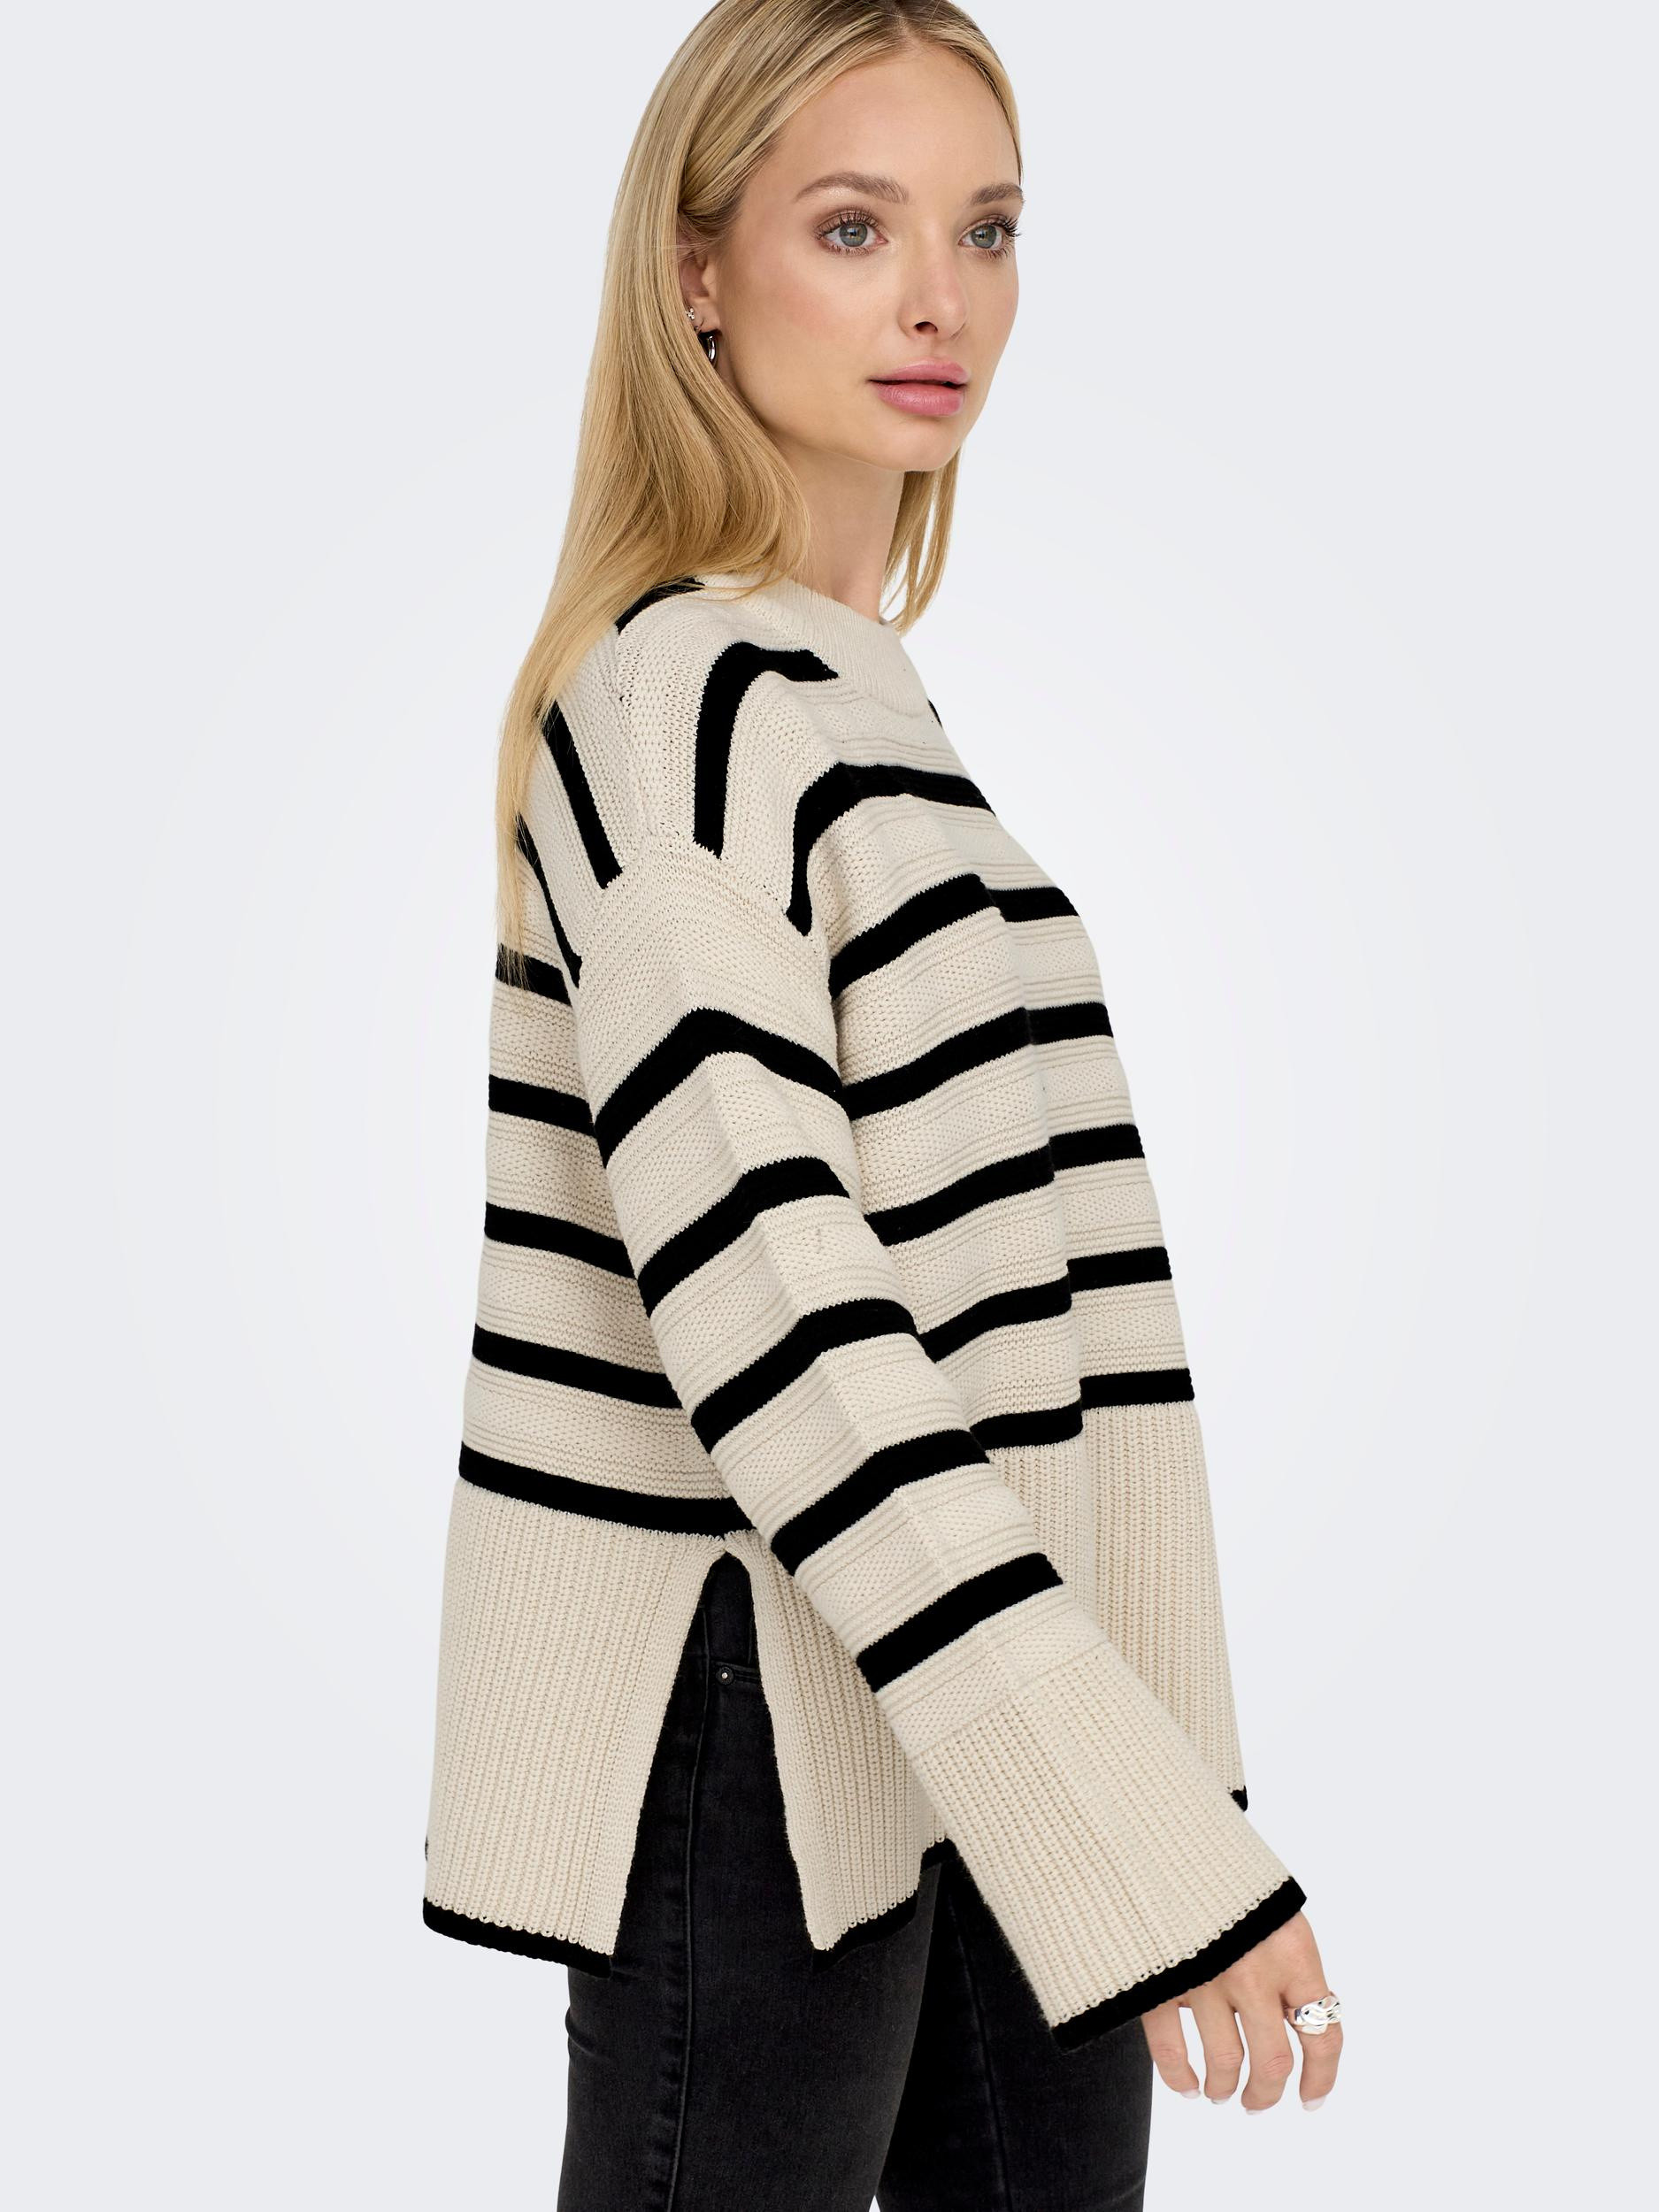 Only - Pullover a righe in misto cotone, Beige, large image number 5